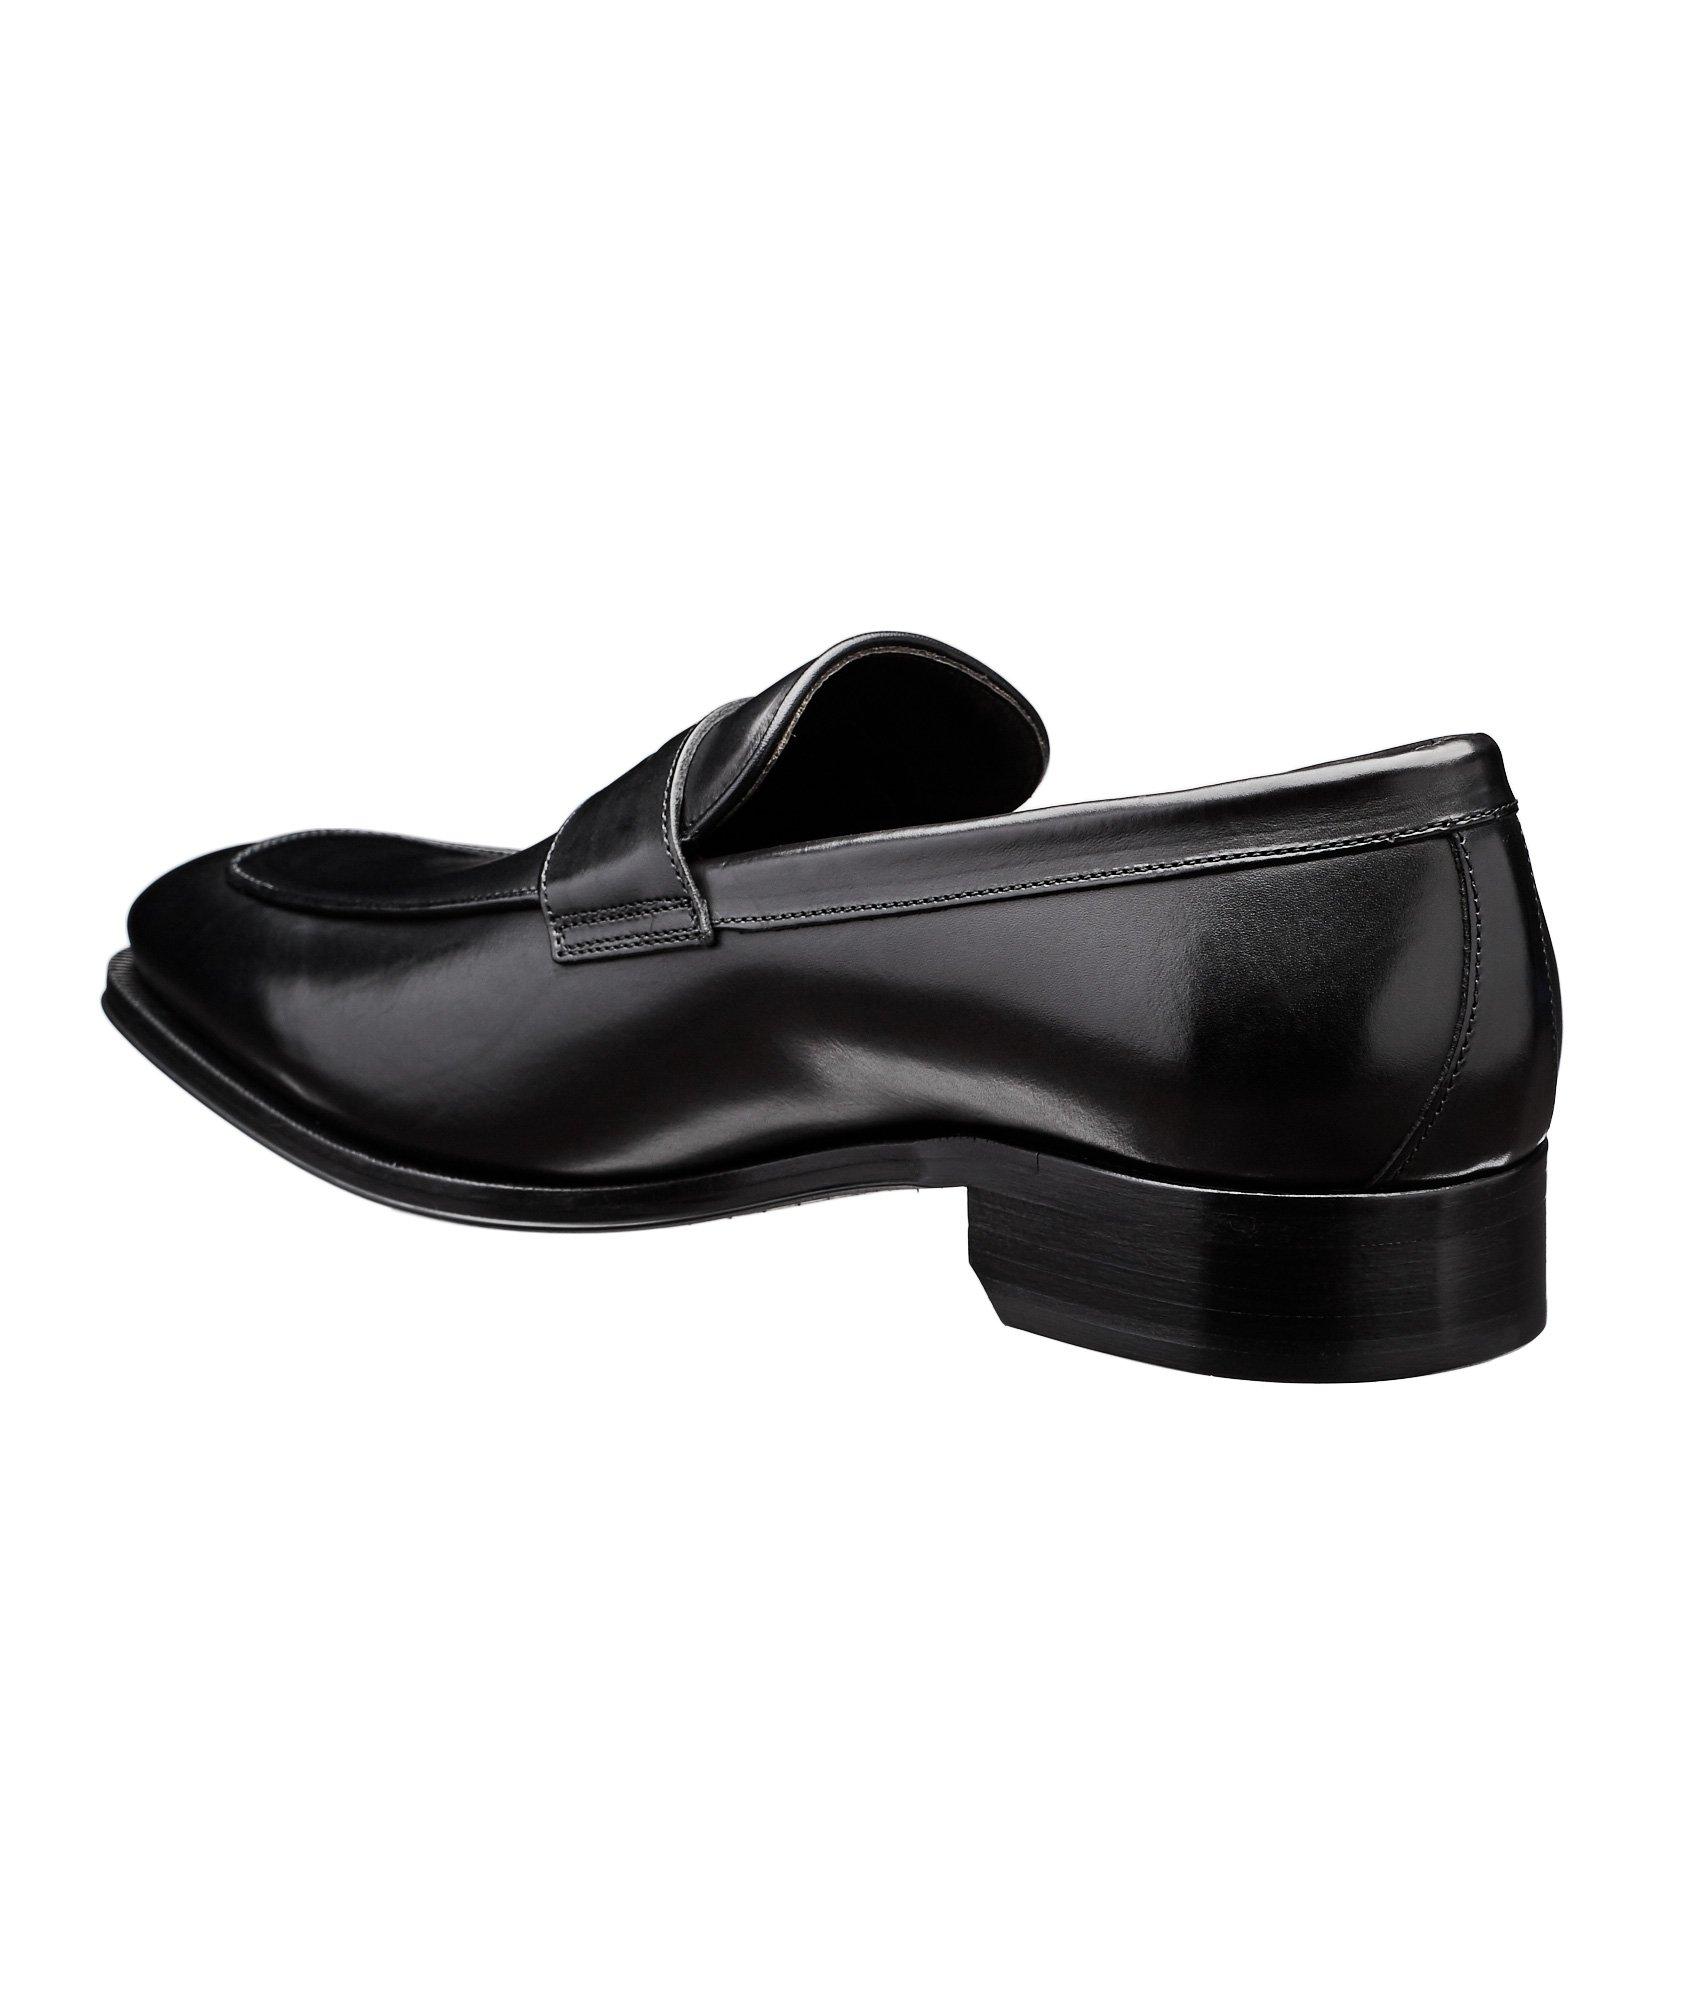 Calfskin Penny Loafers image 1